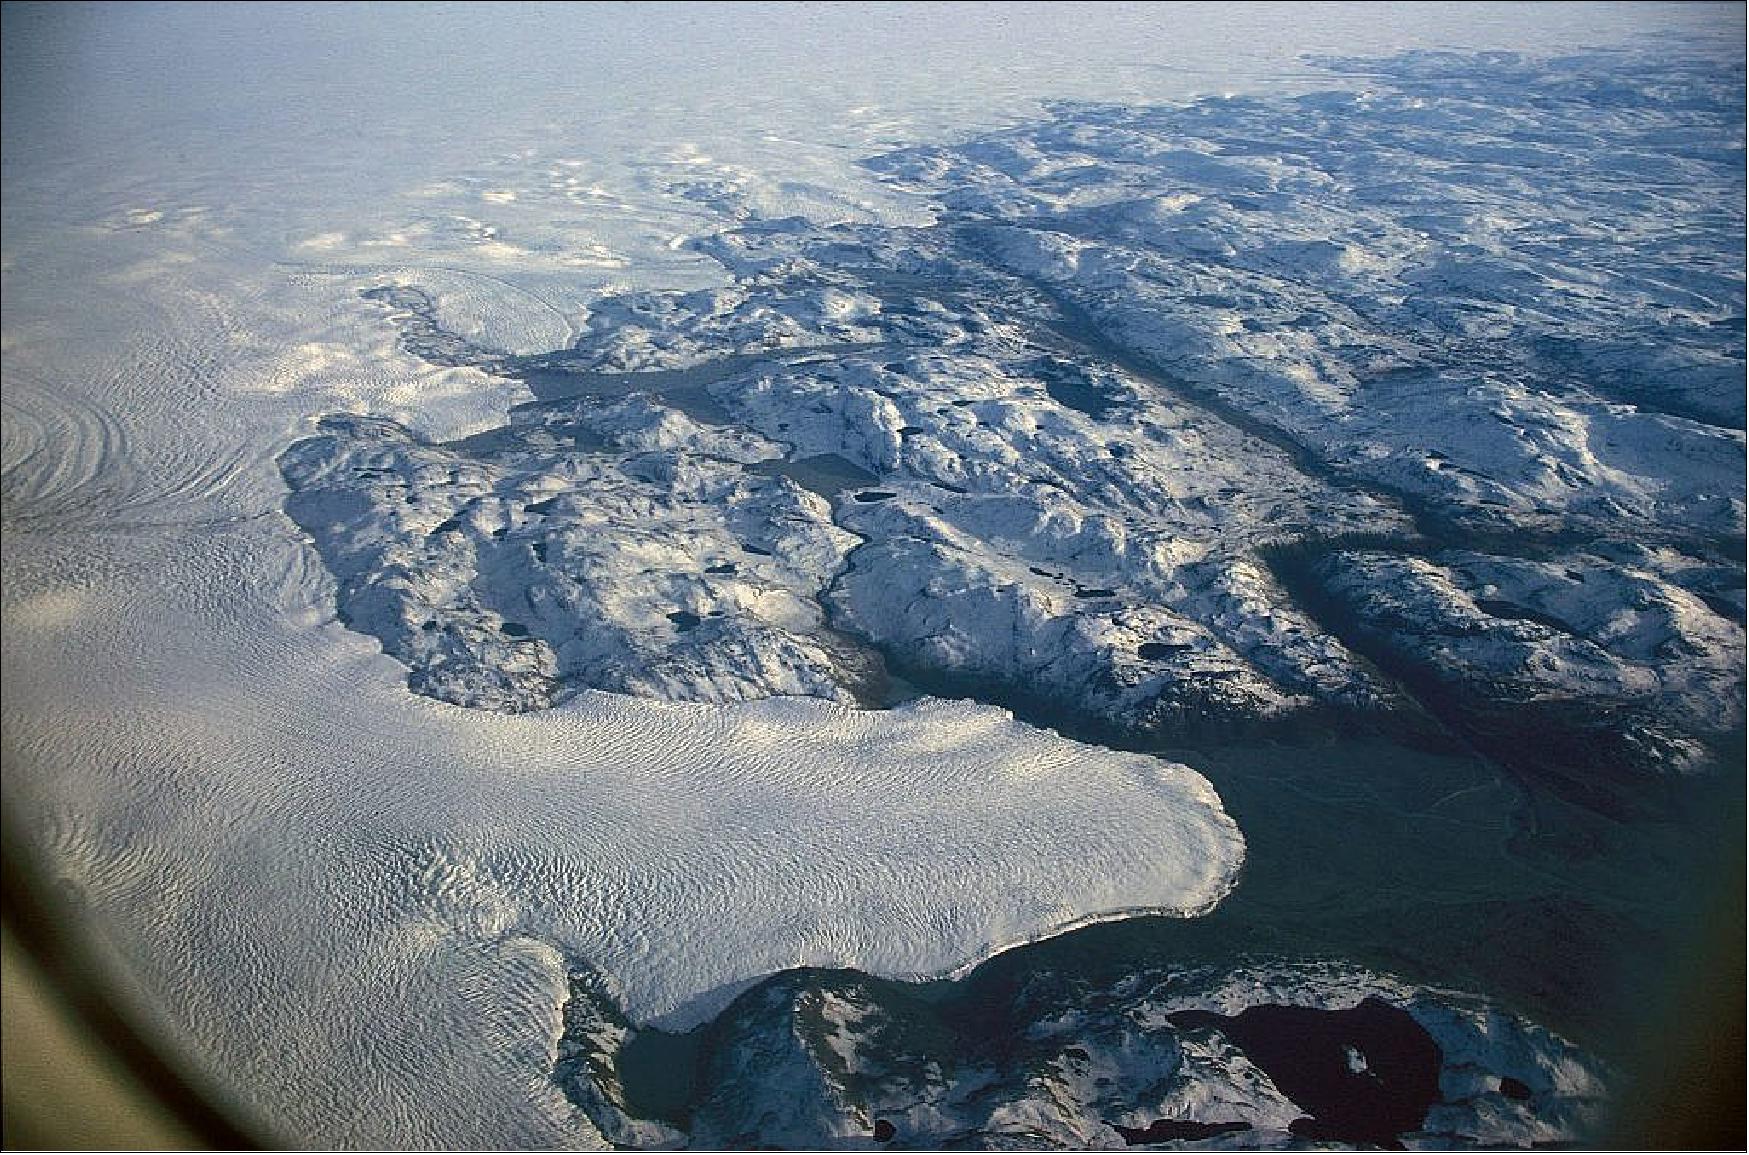 Figure 50: An aerial view of the Greenland ice sheet taken in September 1992. New research finds ice loss has accelerated significantly over the past two decades, transforming the shape of the ice sheet edge and therefore coastal Greenland (image credit: Hannes Grobe, Alfred Wegener Institute for Polar and Marine Research (Own work), CC BY-SA 2.5) 54)